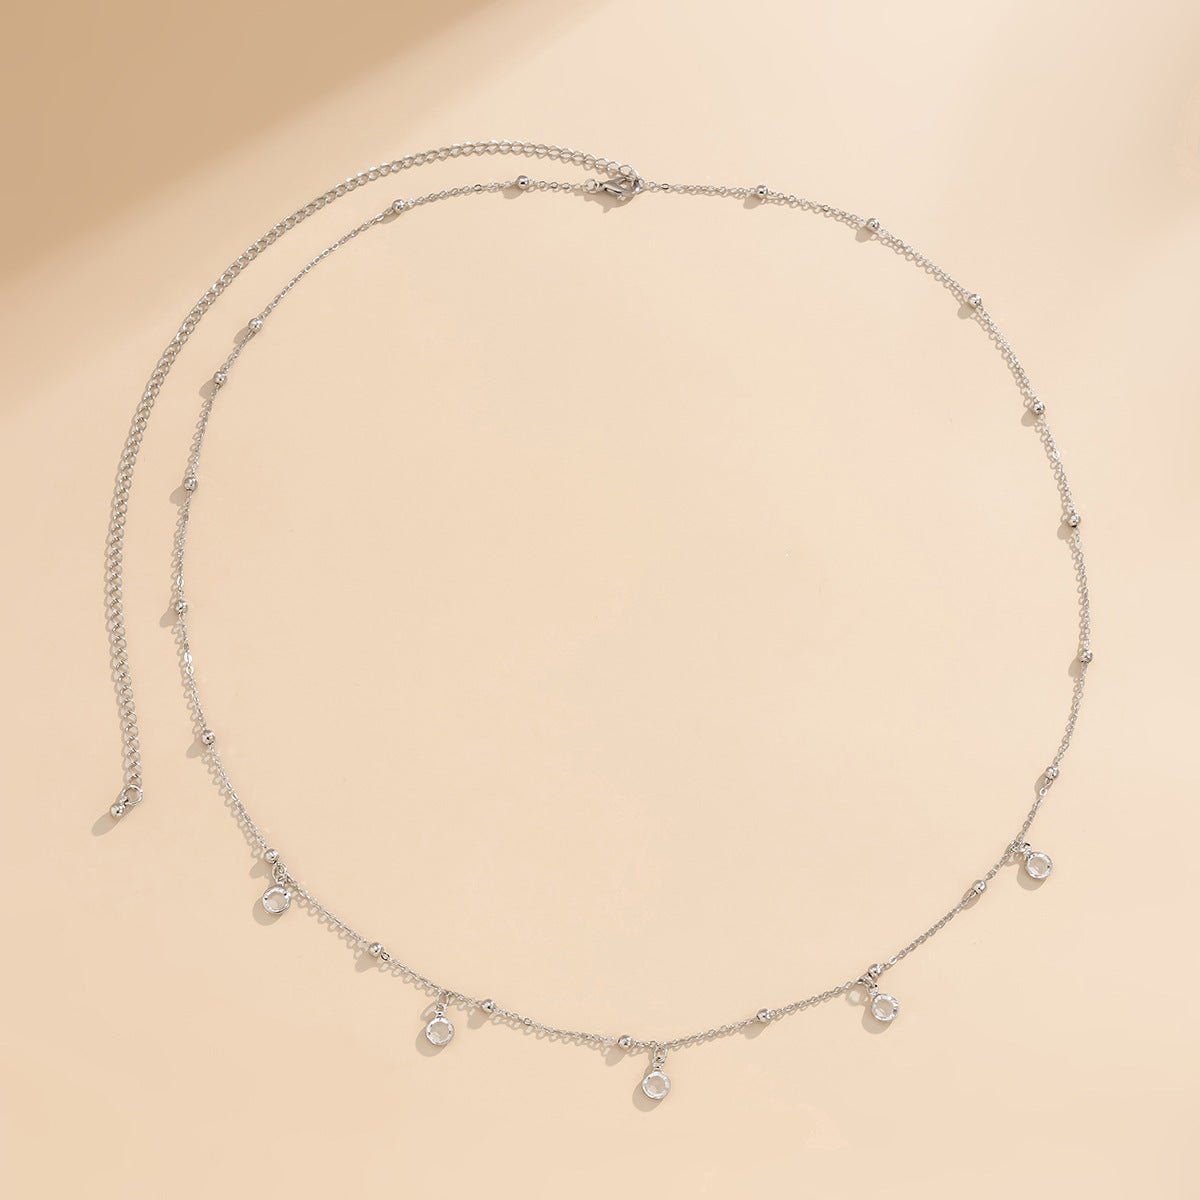 Simple Metal Chain Body Chain Jewelry